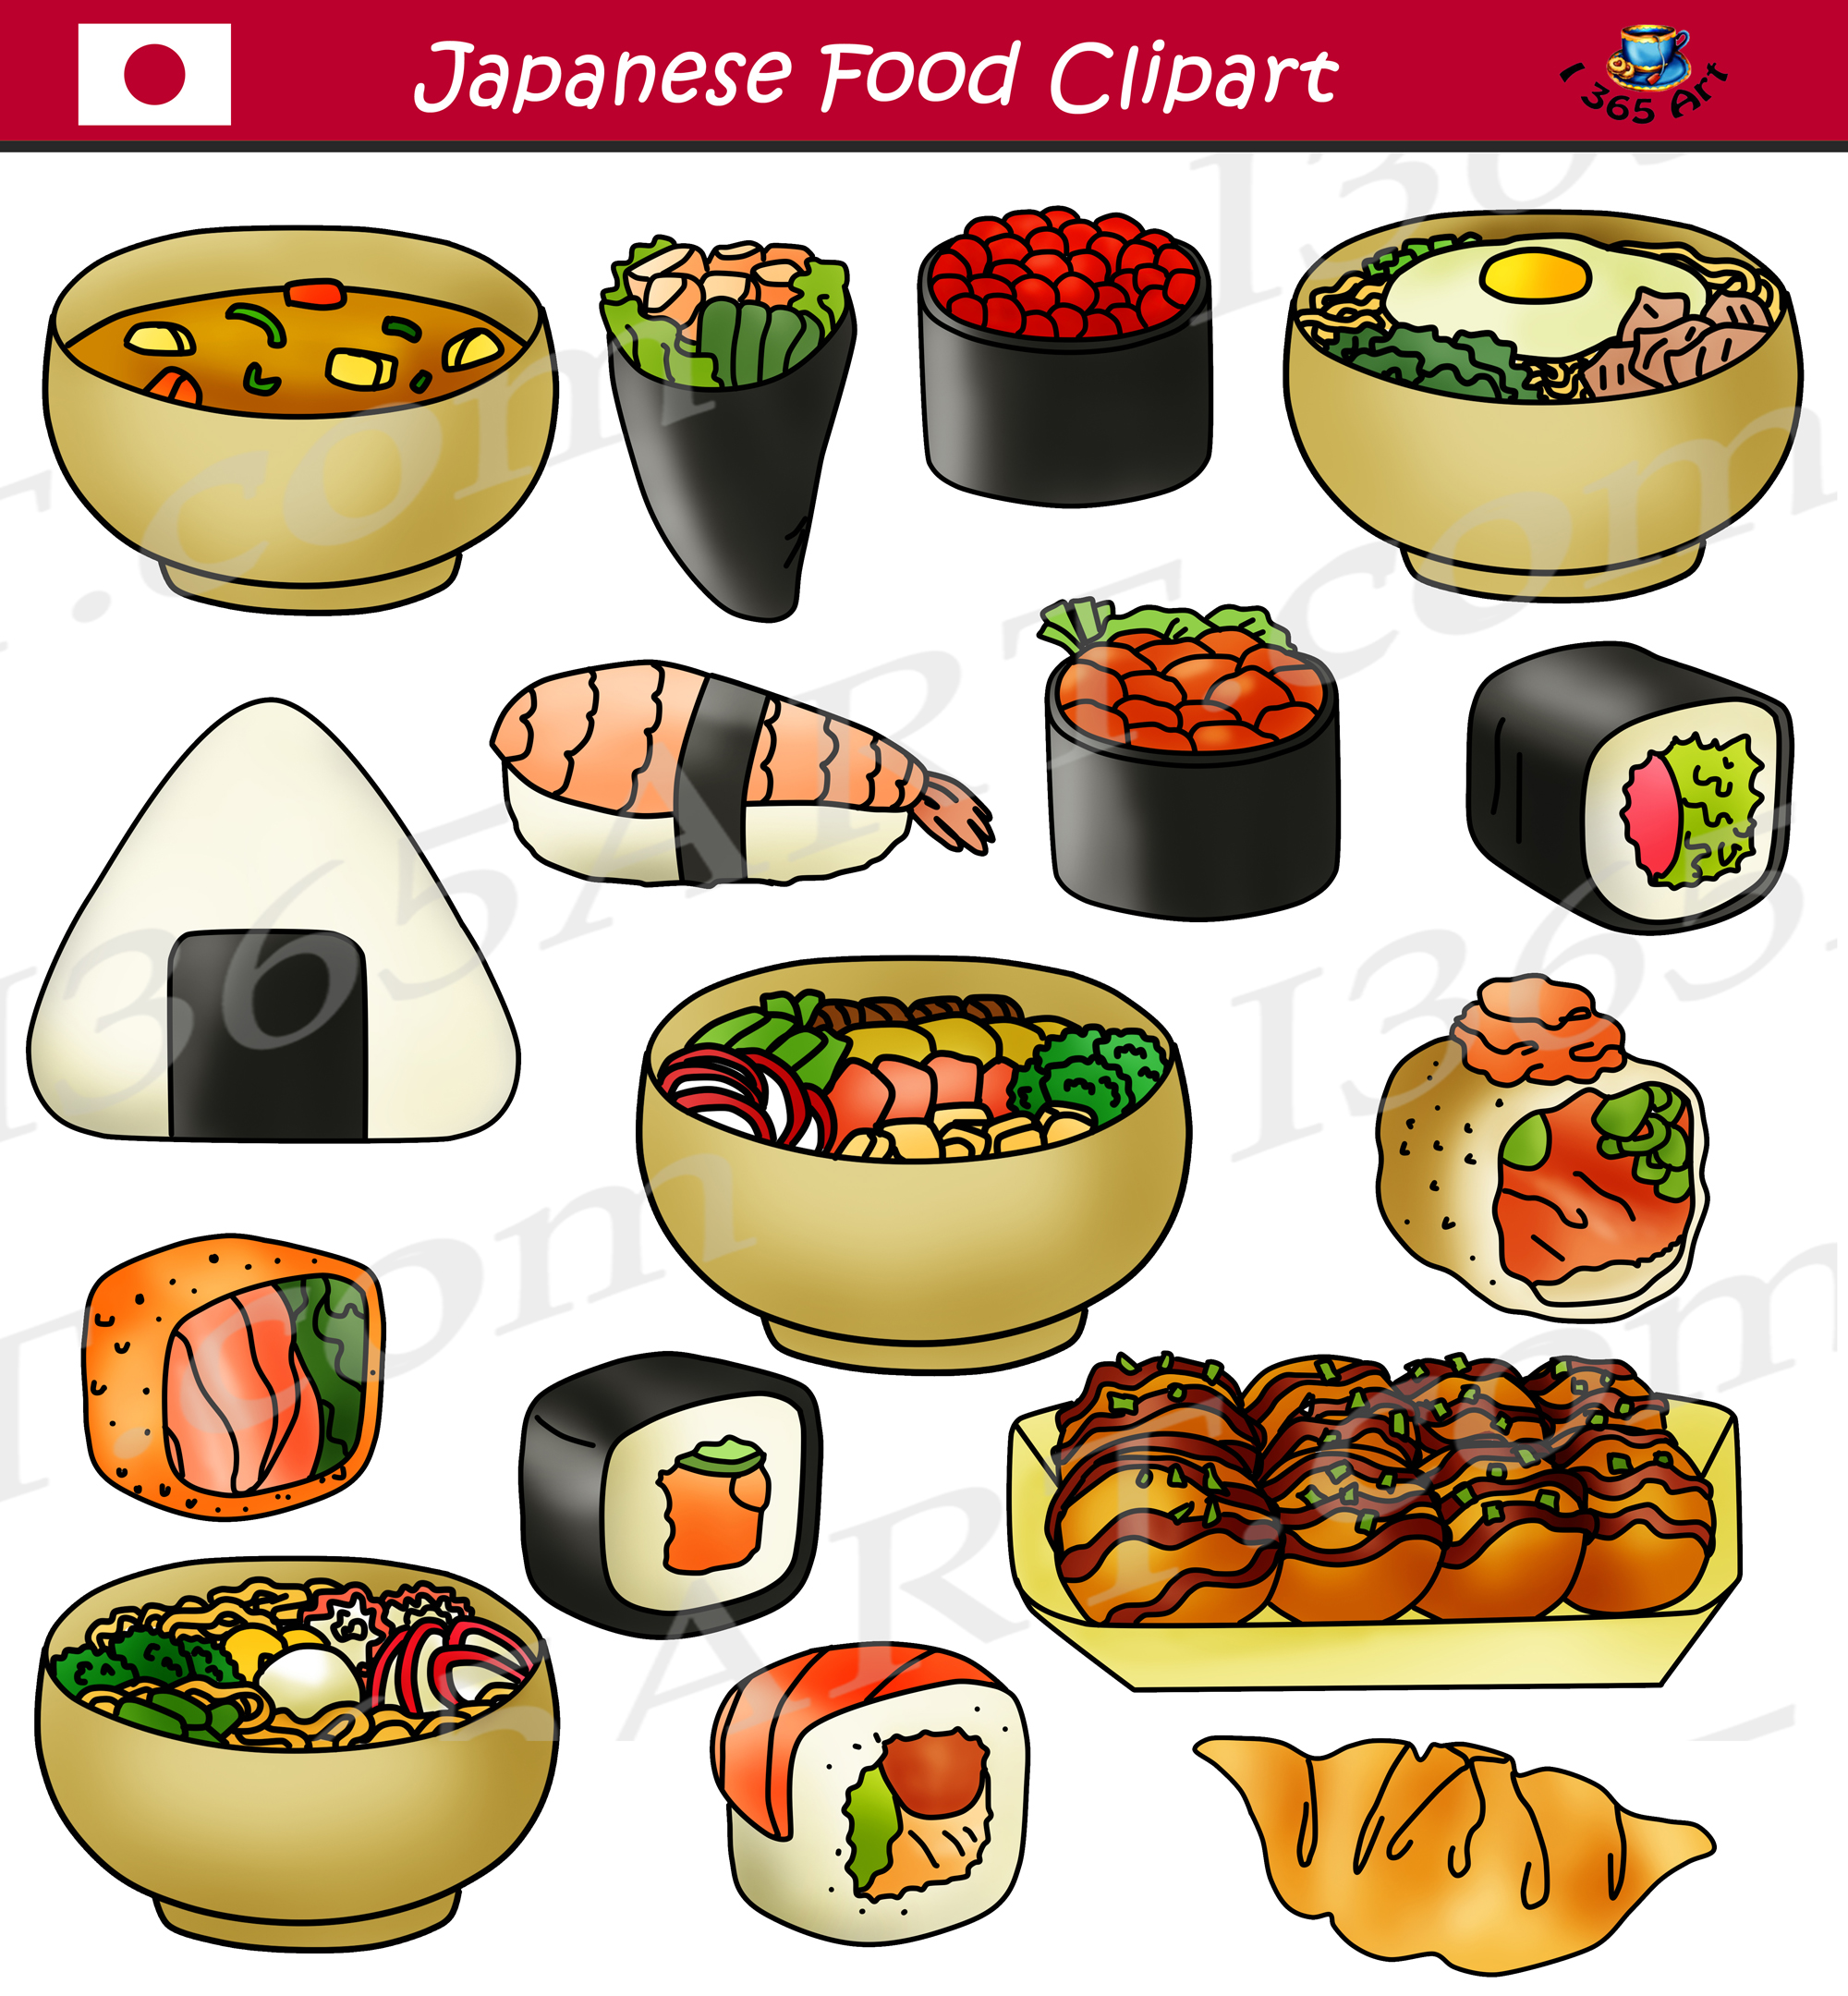 Japanese food clipart.